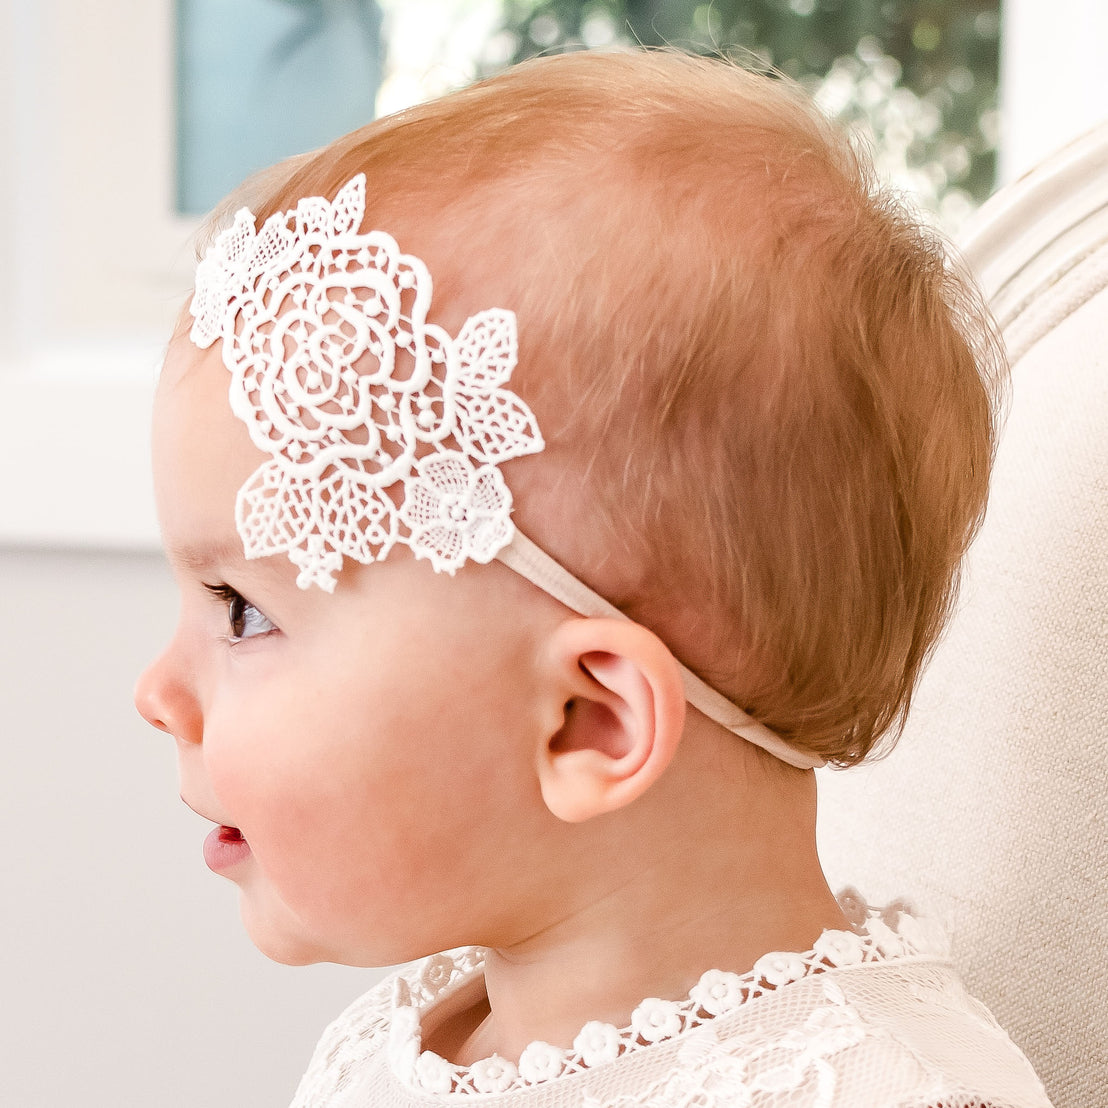 Profile view of a baby with light hair wearing a delicate Juliette Lace Headband with a large floral design, sitting indoors against a soft, bright background.